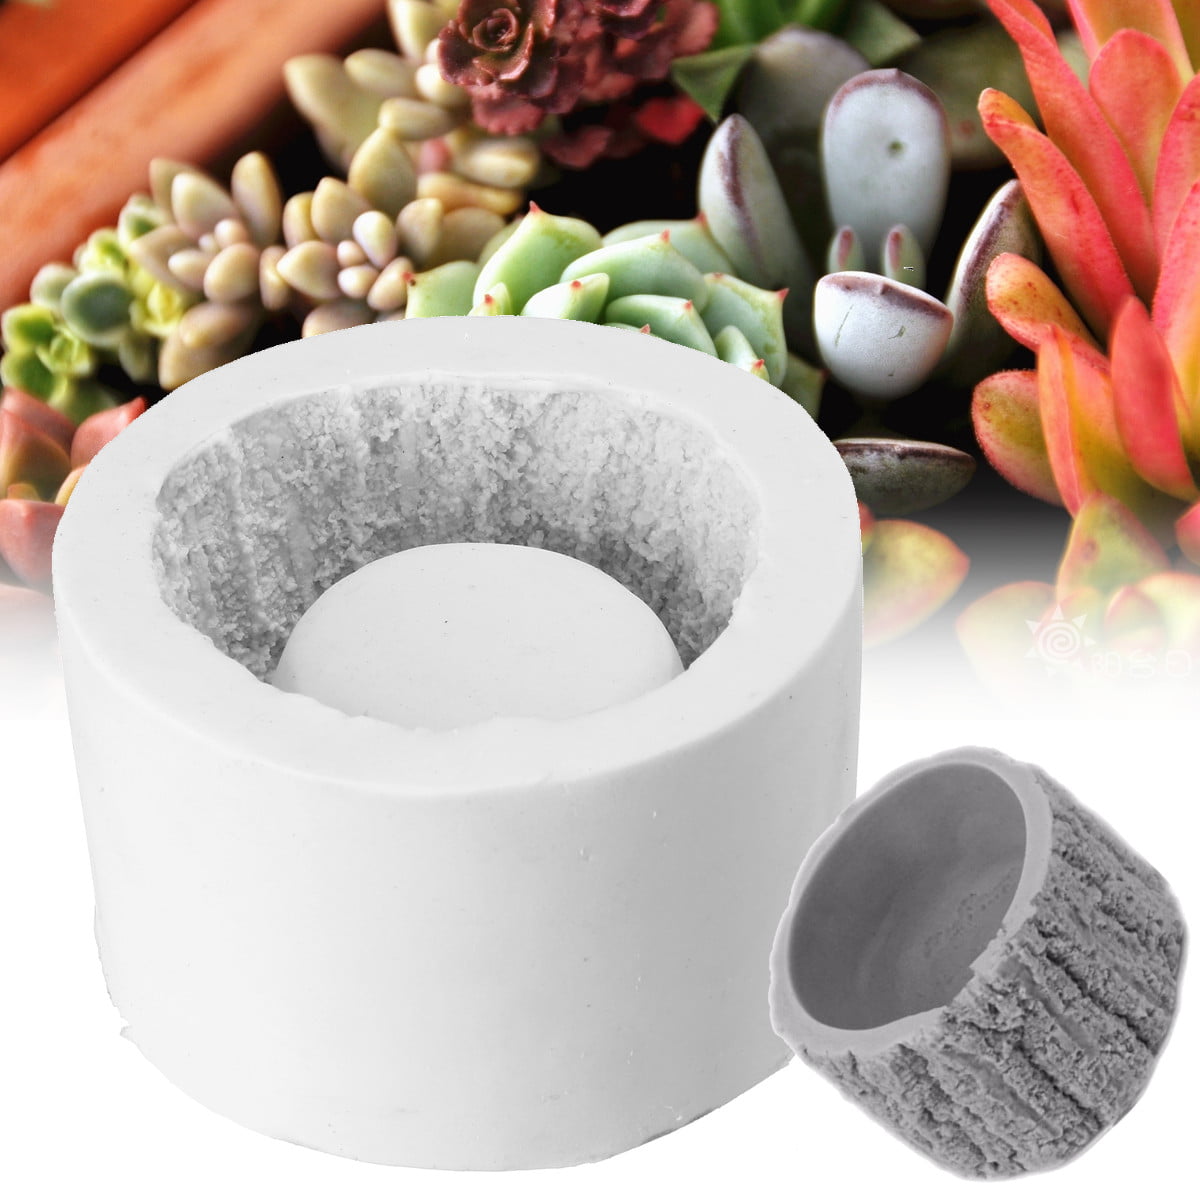 3Pcs Succulent Plant Flower Pot Resin Moulds Silicone Epoxy Casting Mould Diamond Heart Hexagon Octagon Ashtray Soap Dish Candle Holder Molds Jewelry Making Mold for Handmade Craft DIY 